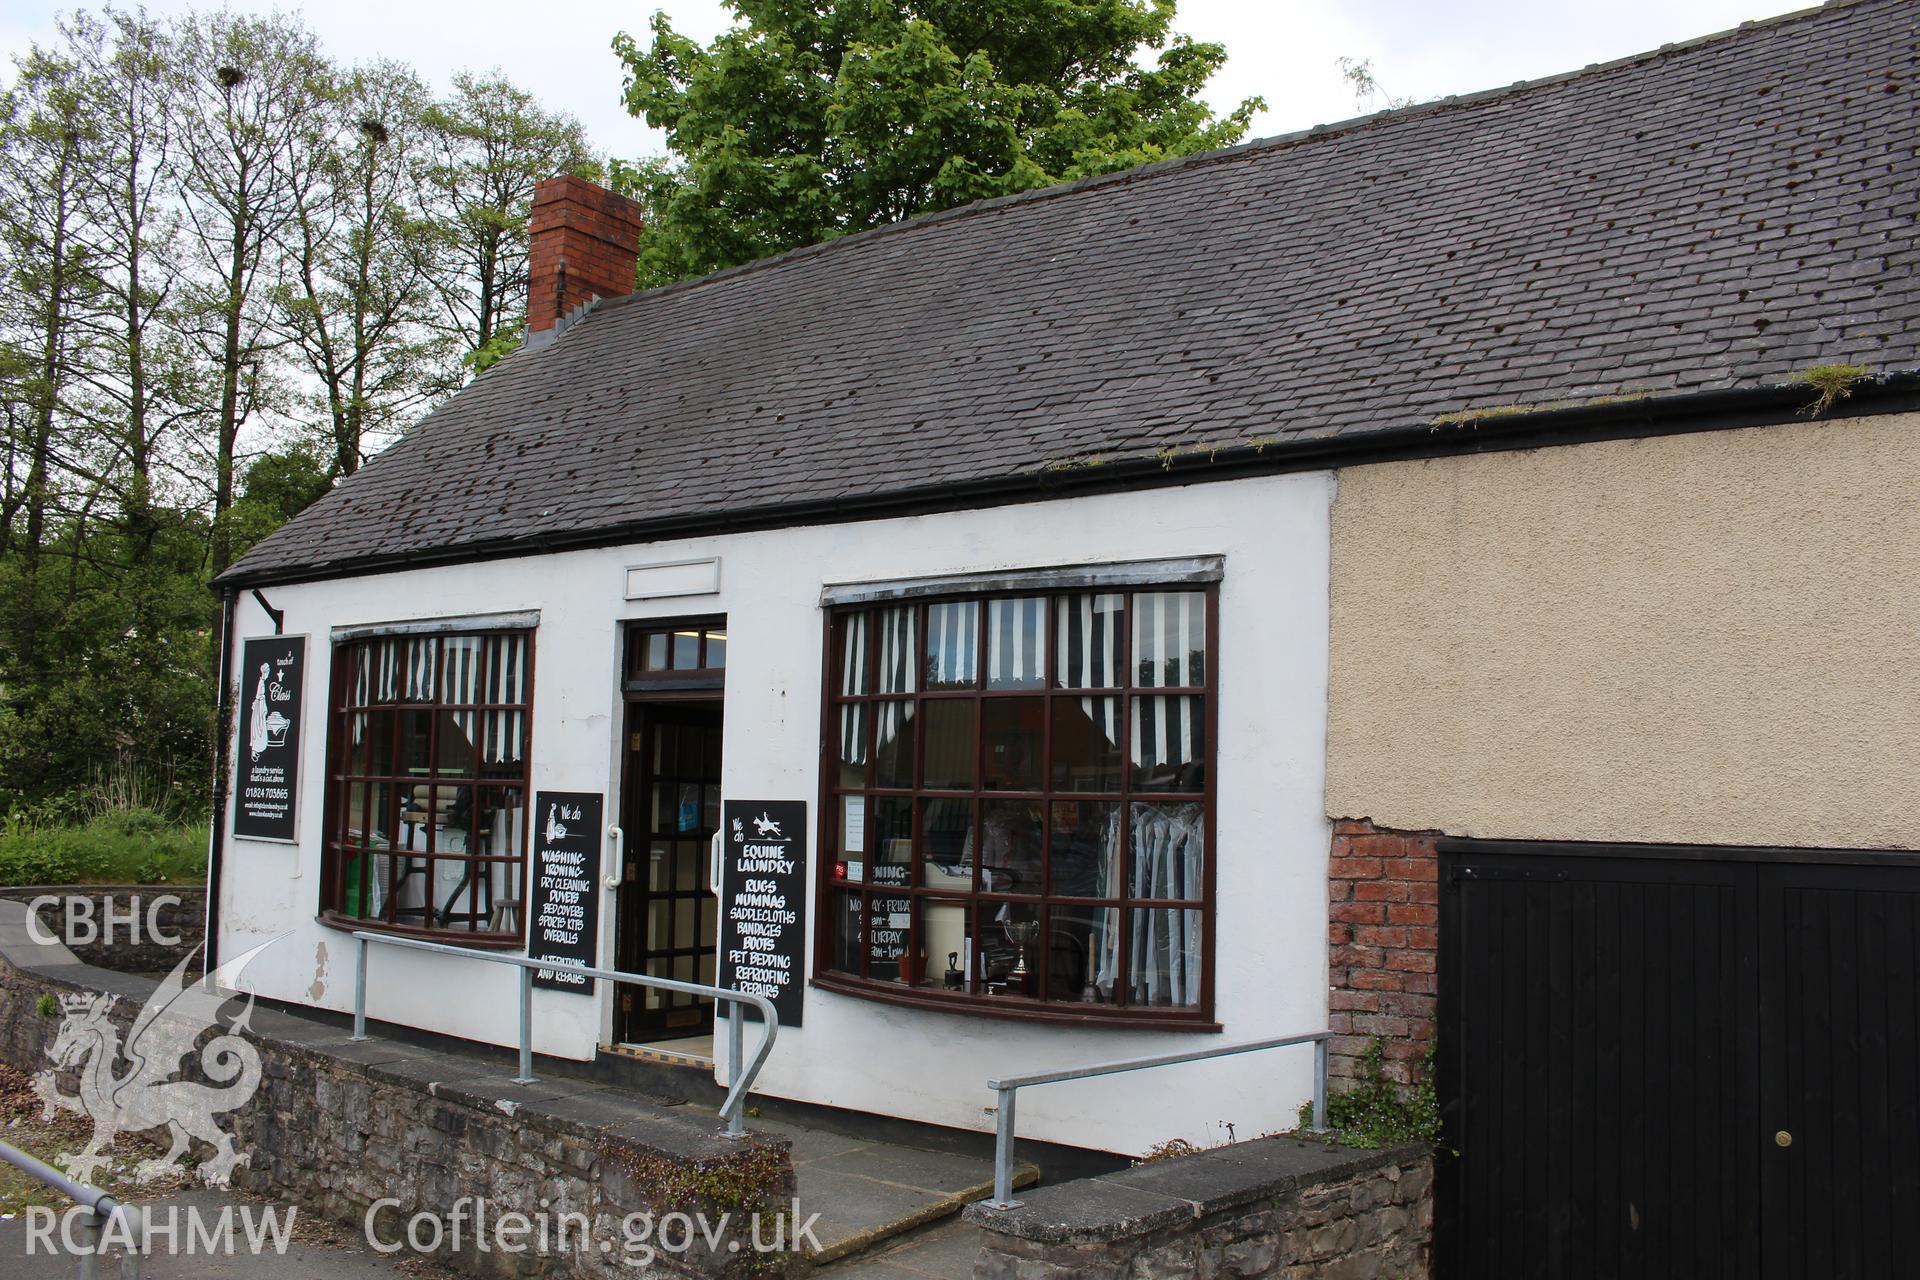 Colour photograph showing exterior view of Touch of Class laundry services at 3 Mwrog Street, Ruthin. Photographed during survey conducted by Geoff Ward on 14th May 2014.